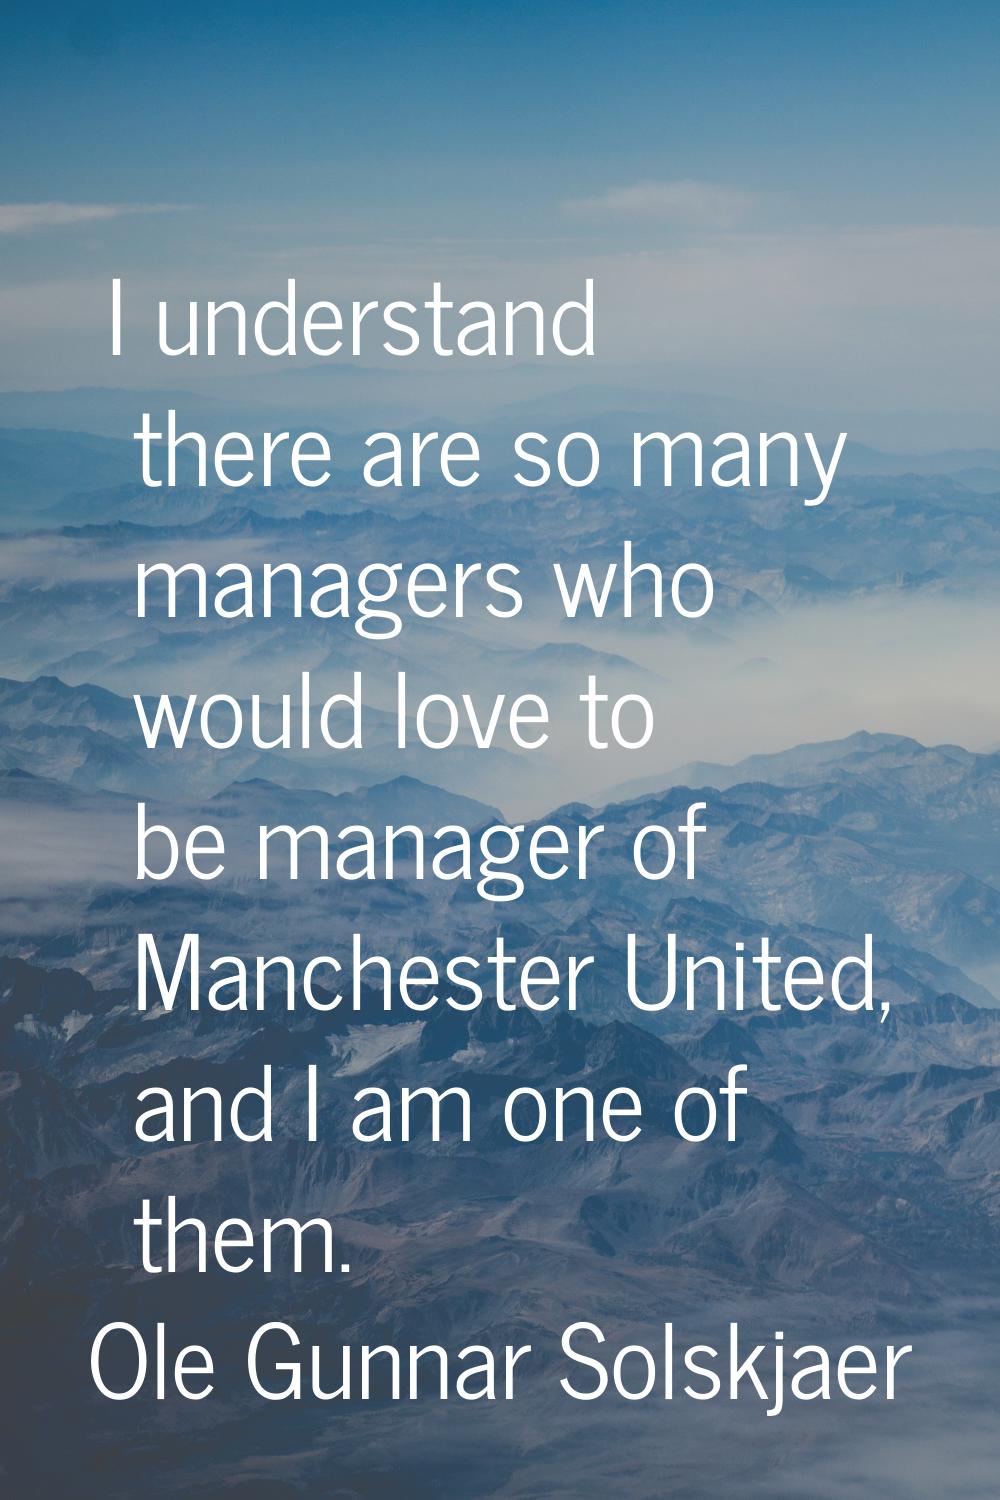 I understand there are so many managers who would love to be manager of Manchester United, and I am